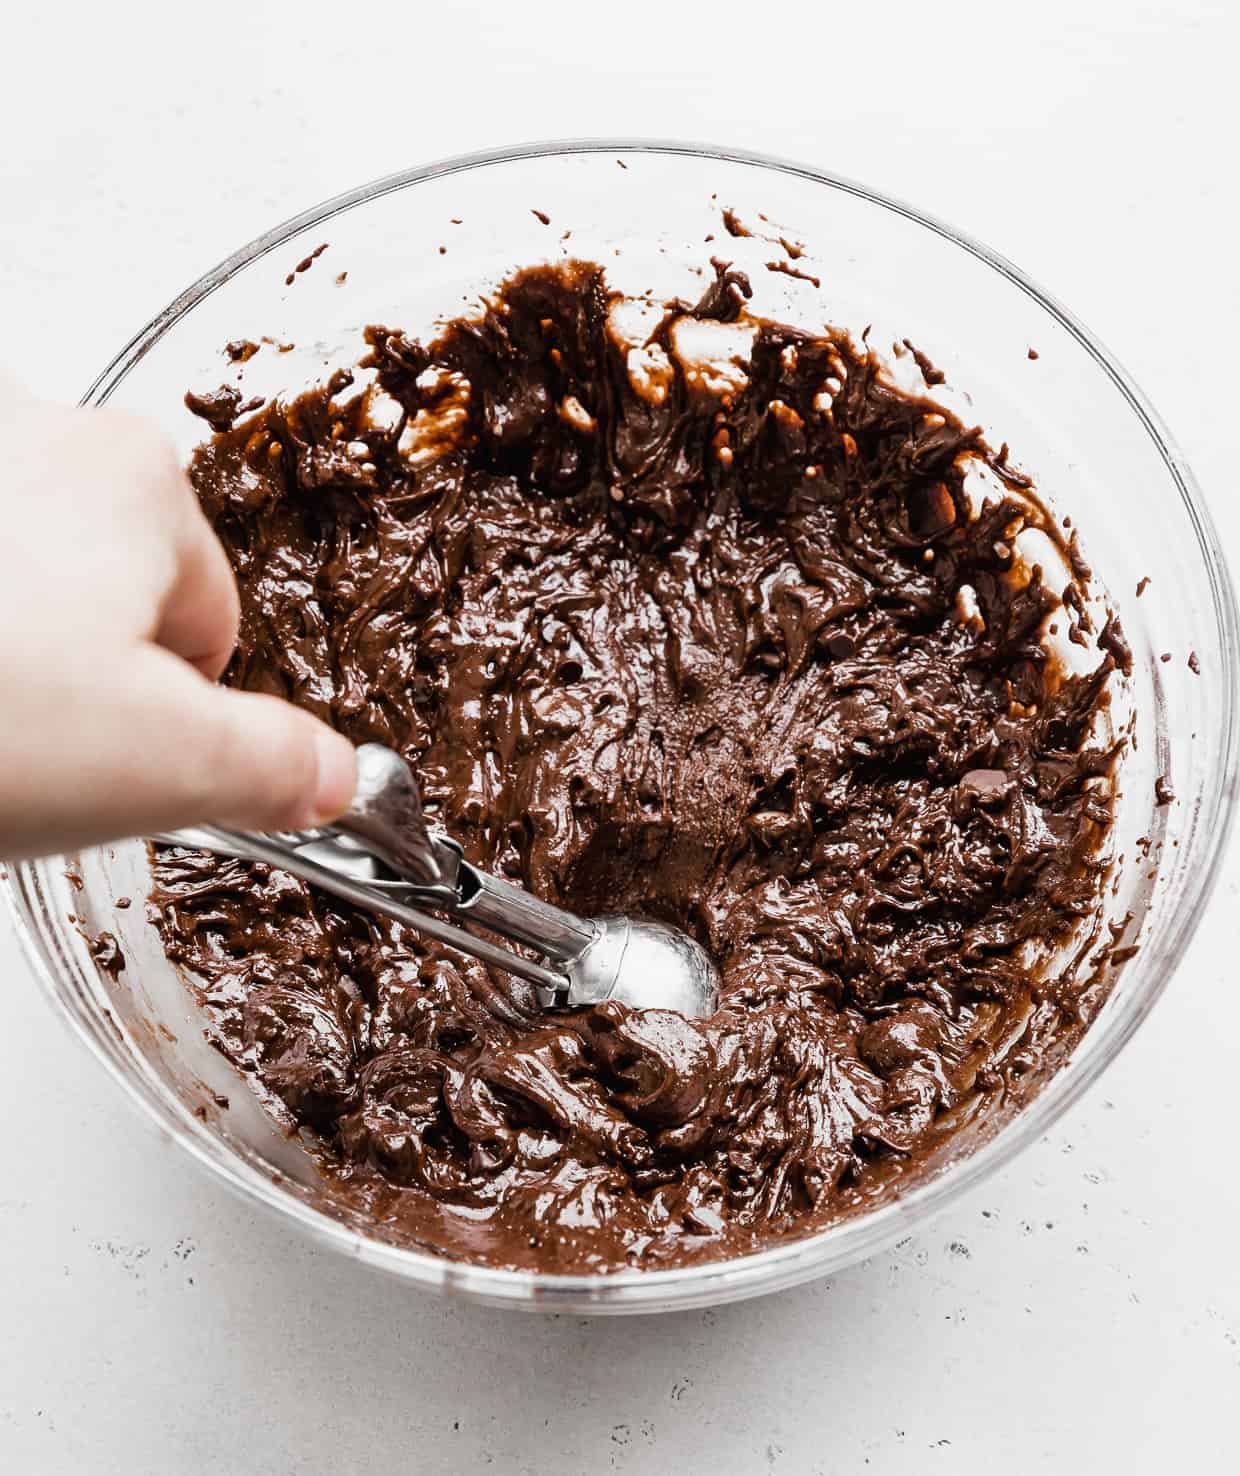 A hand holding a cookie scoop reaching into a bowl full of Brownie Mix Cookie dough batter. 